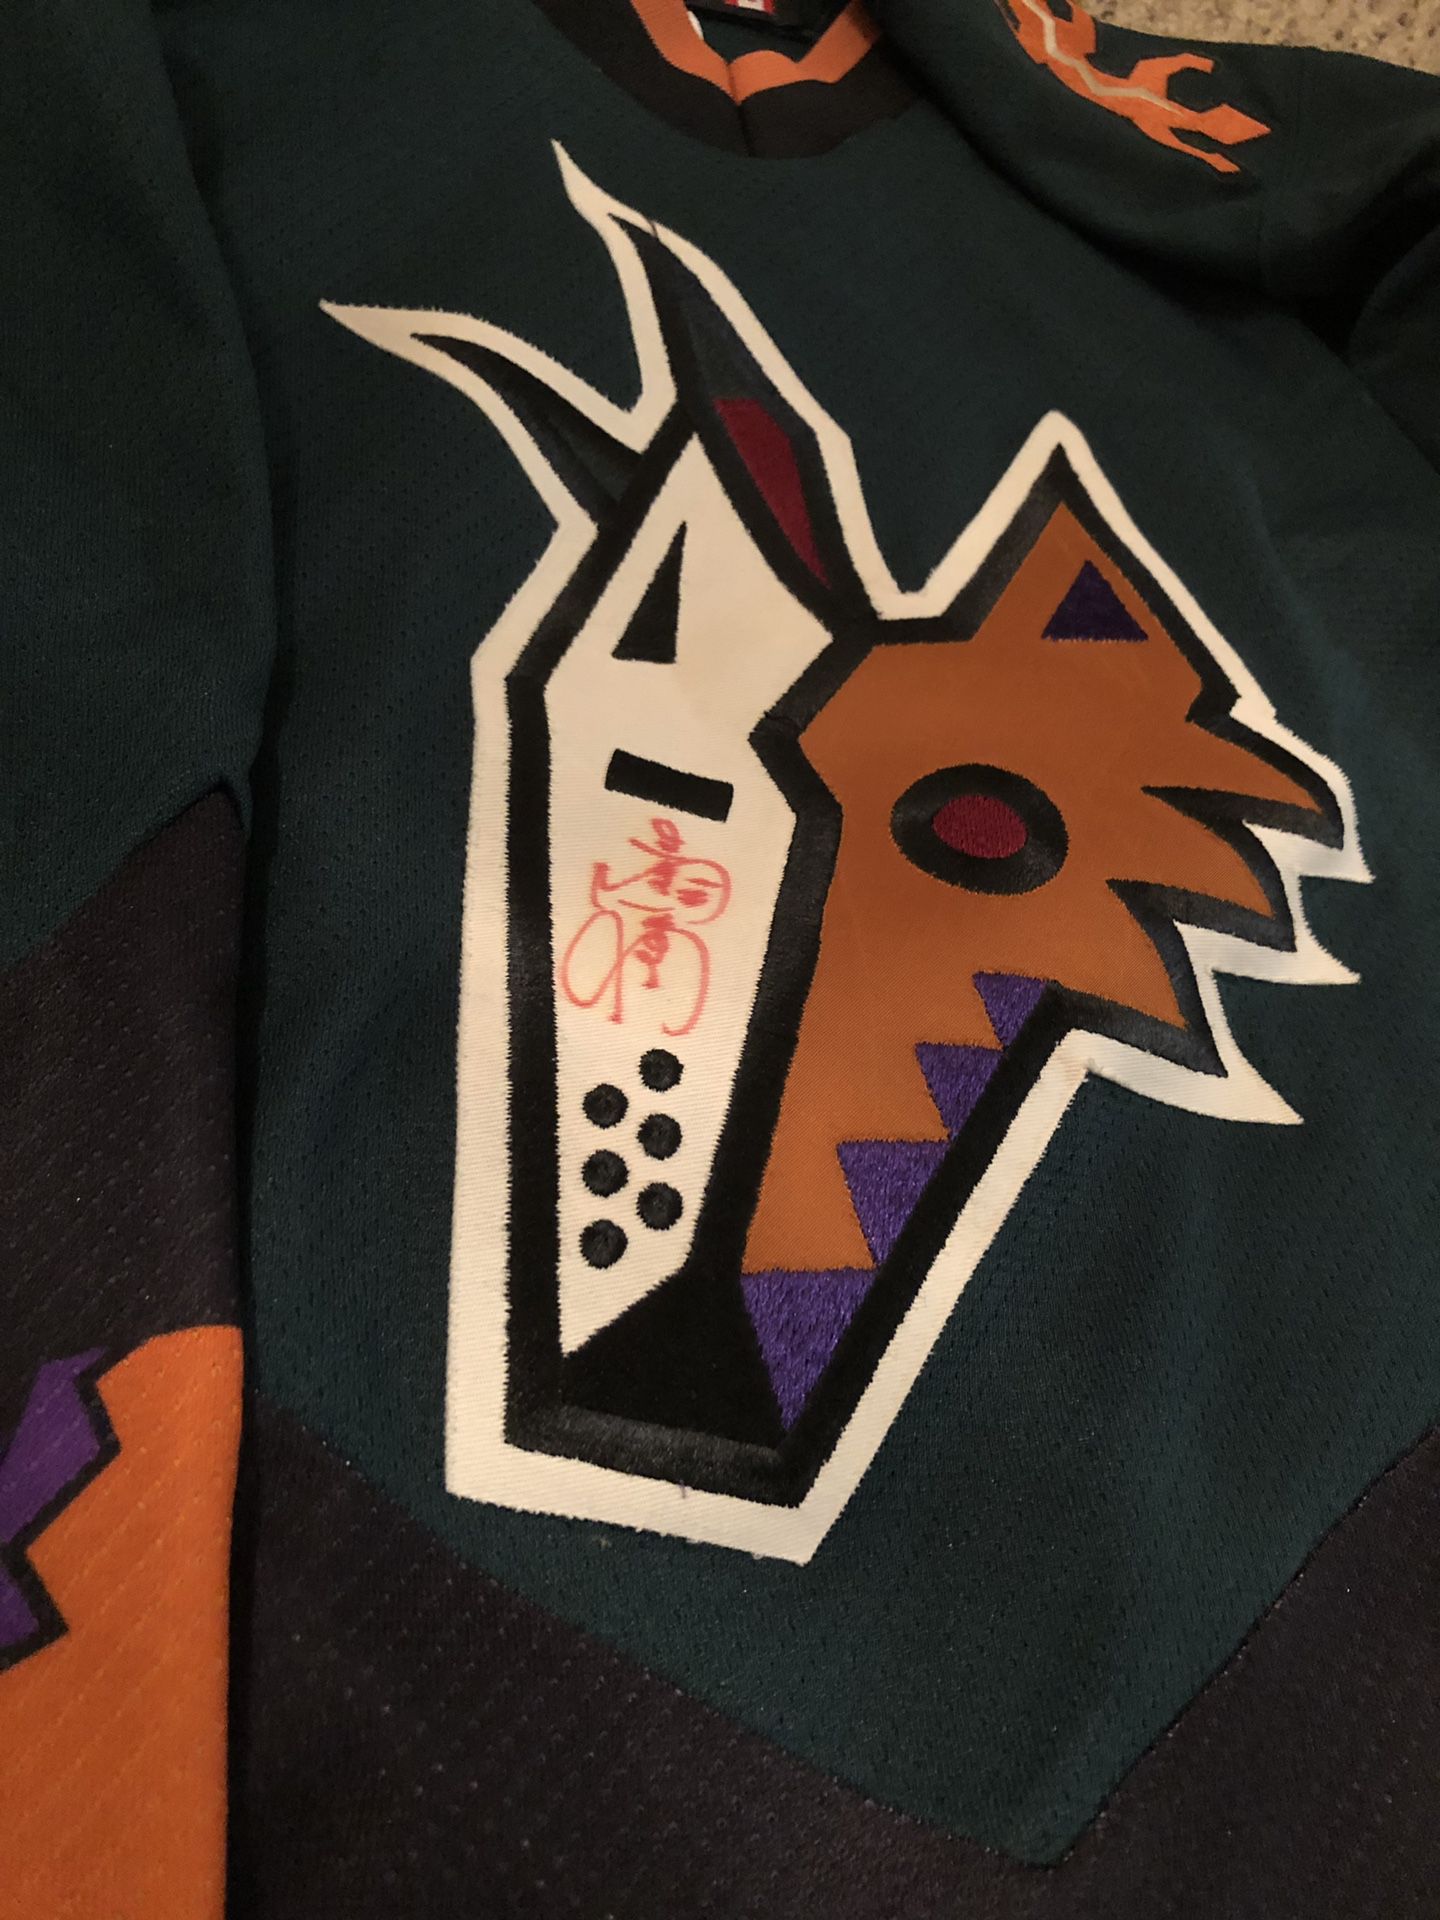 Starter Authentic Coyotes Kachina NHL Hockey Jersey for Sale in Sun City,  AZ - OfferUp